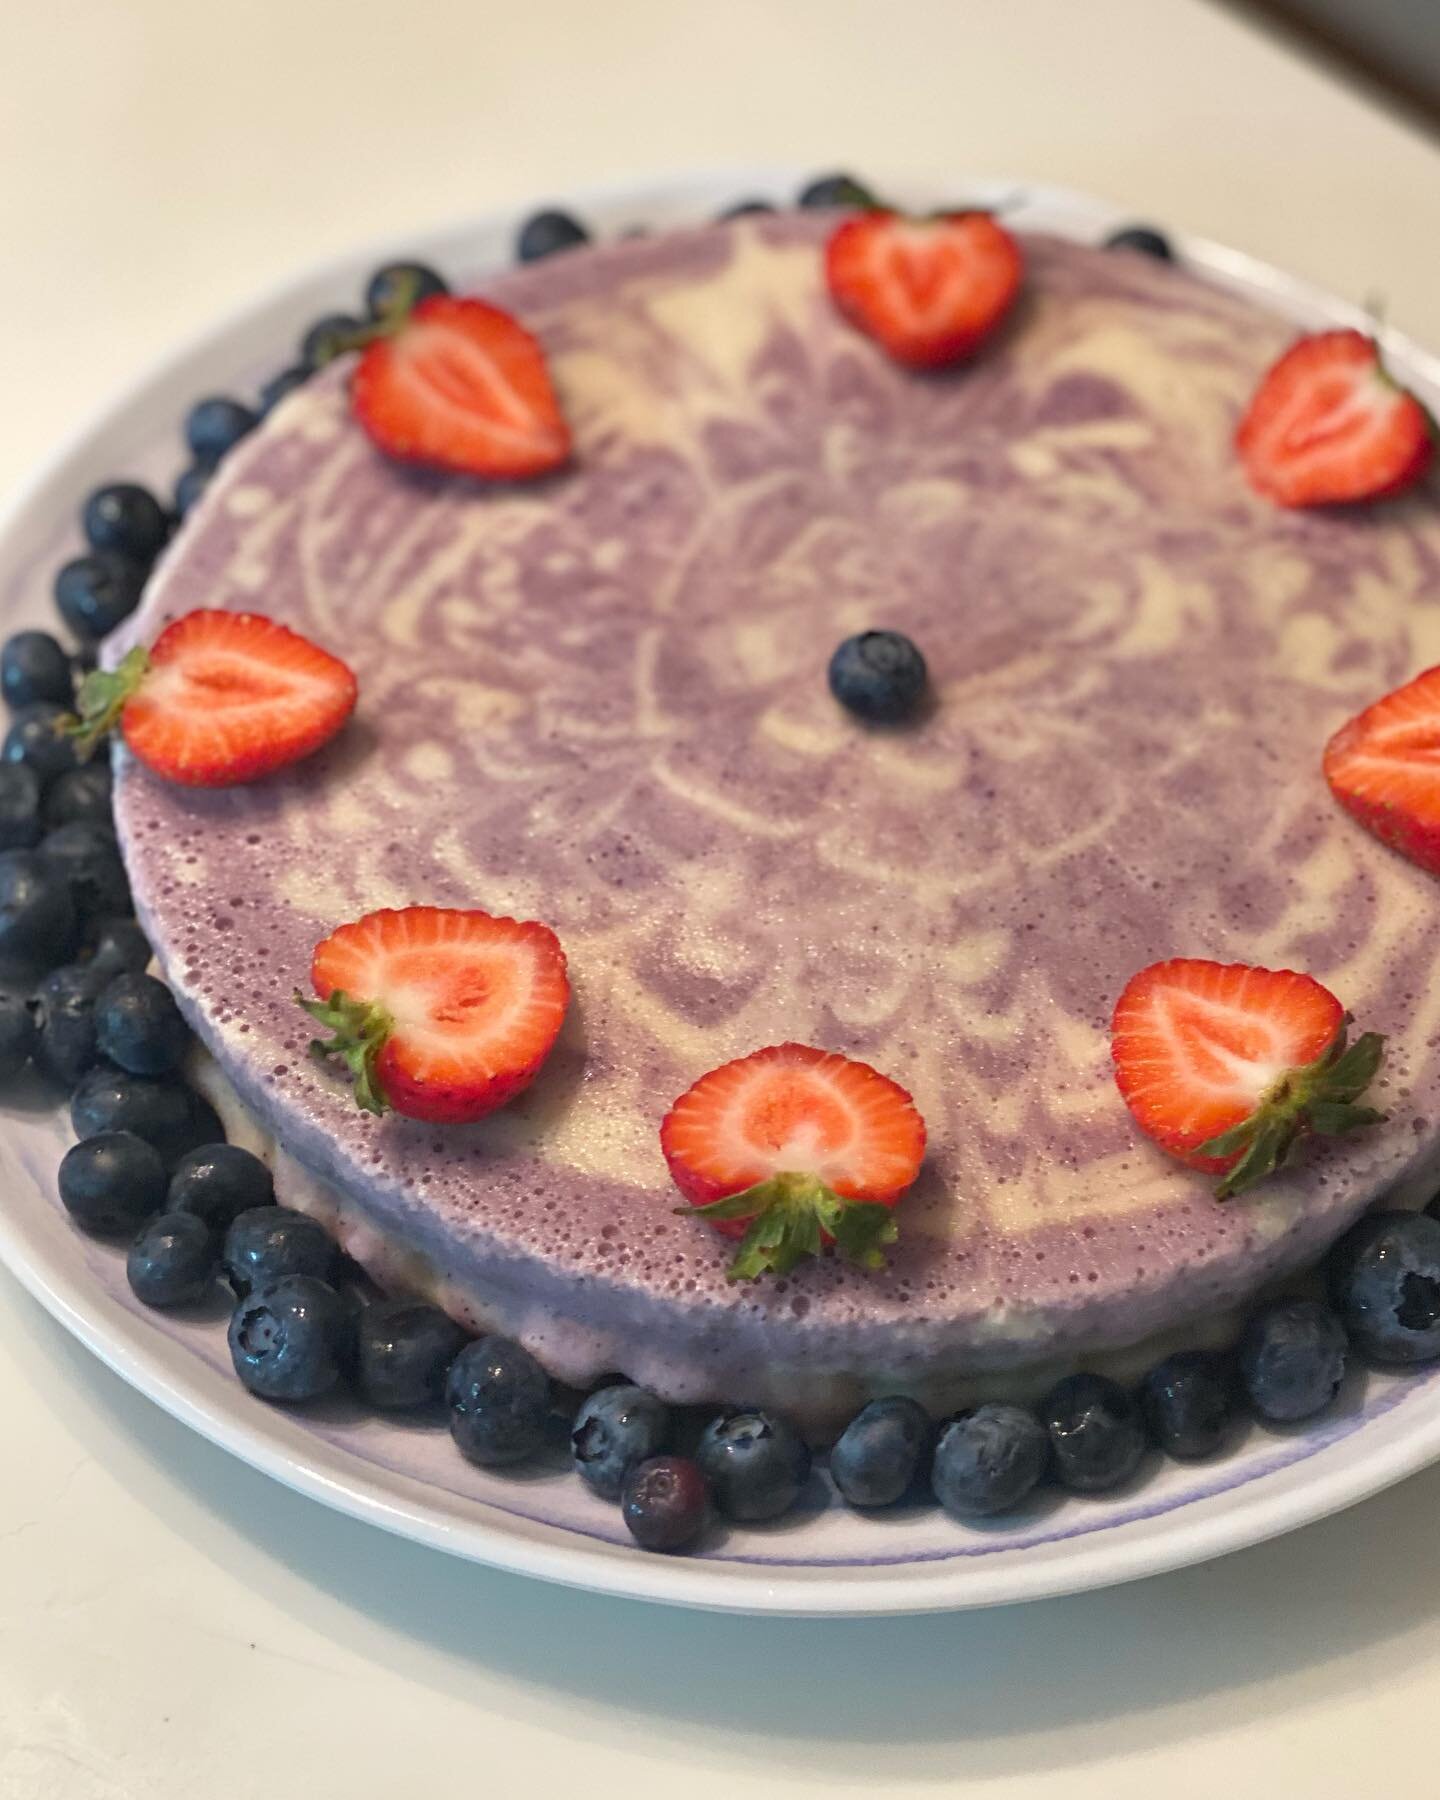 No-Bake Wild 🫐 Raw Cashew &ldquo;Cheesecake&rdquo; 😋

Convenient since our oven has been on the fritz for almost a month now 🙃 and this &ldquo;baked&rdquo; in the freezer 🧊

Adapted a recipe from the @delicious_plants blog 🍓 I added the marbled 